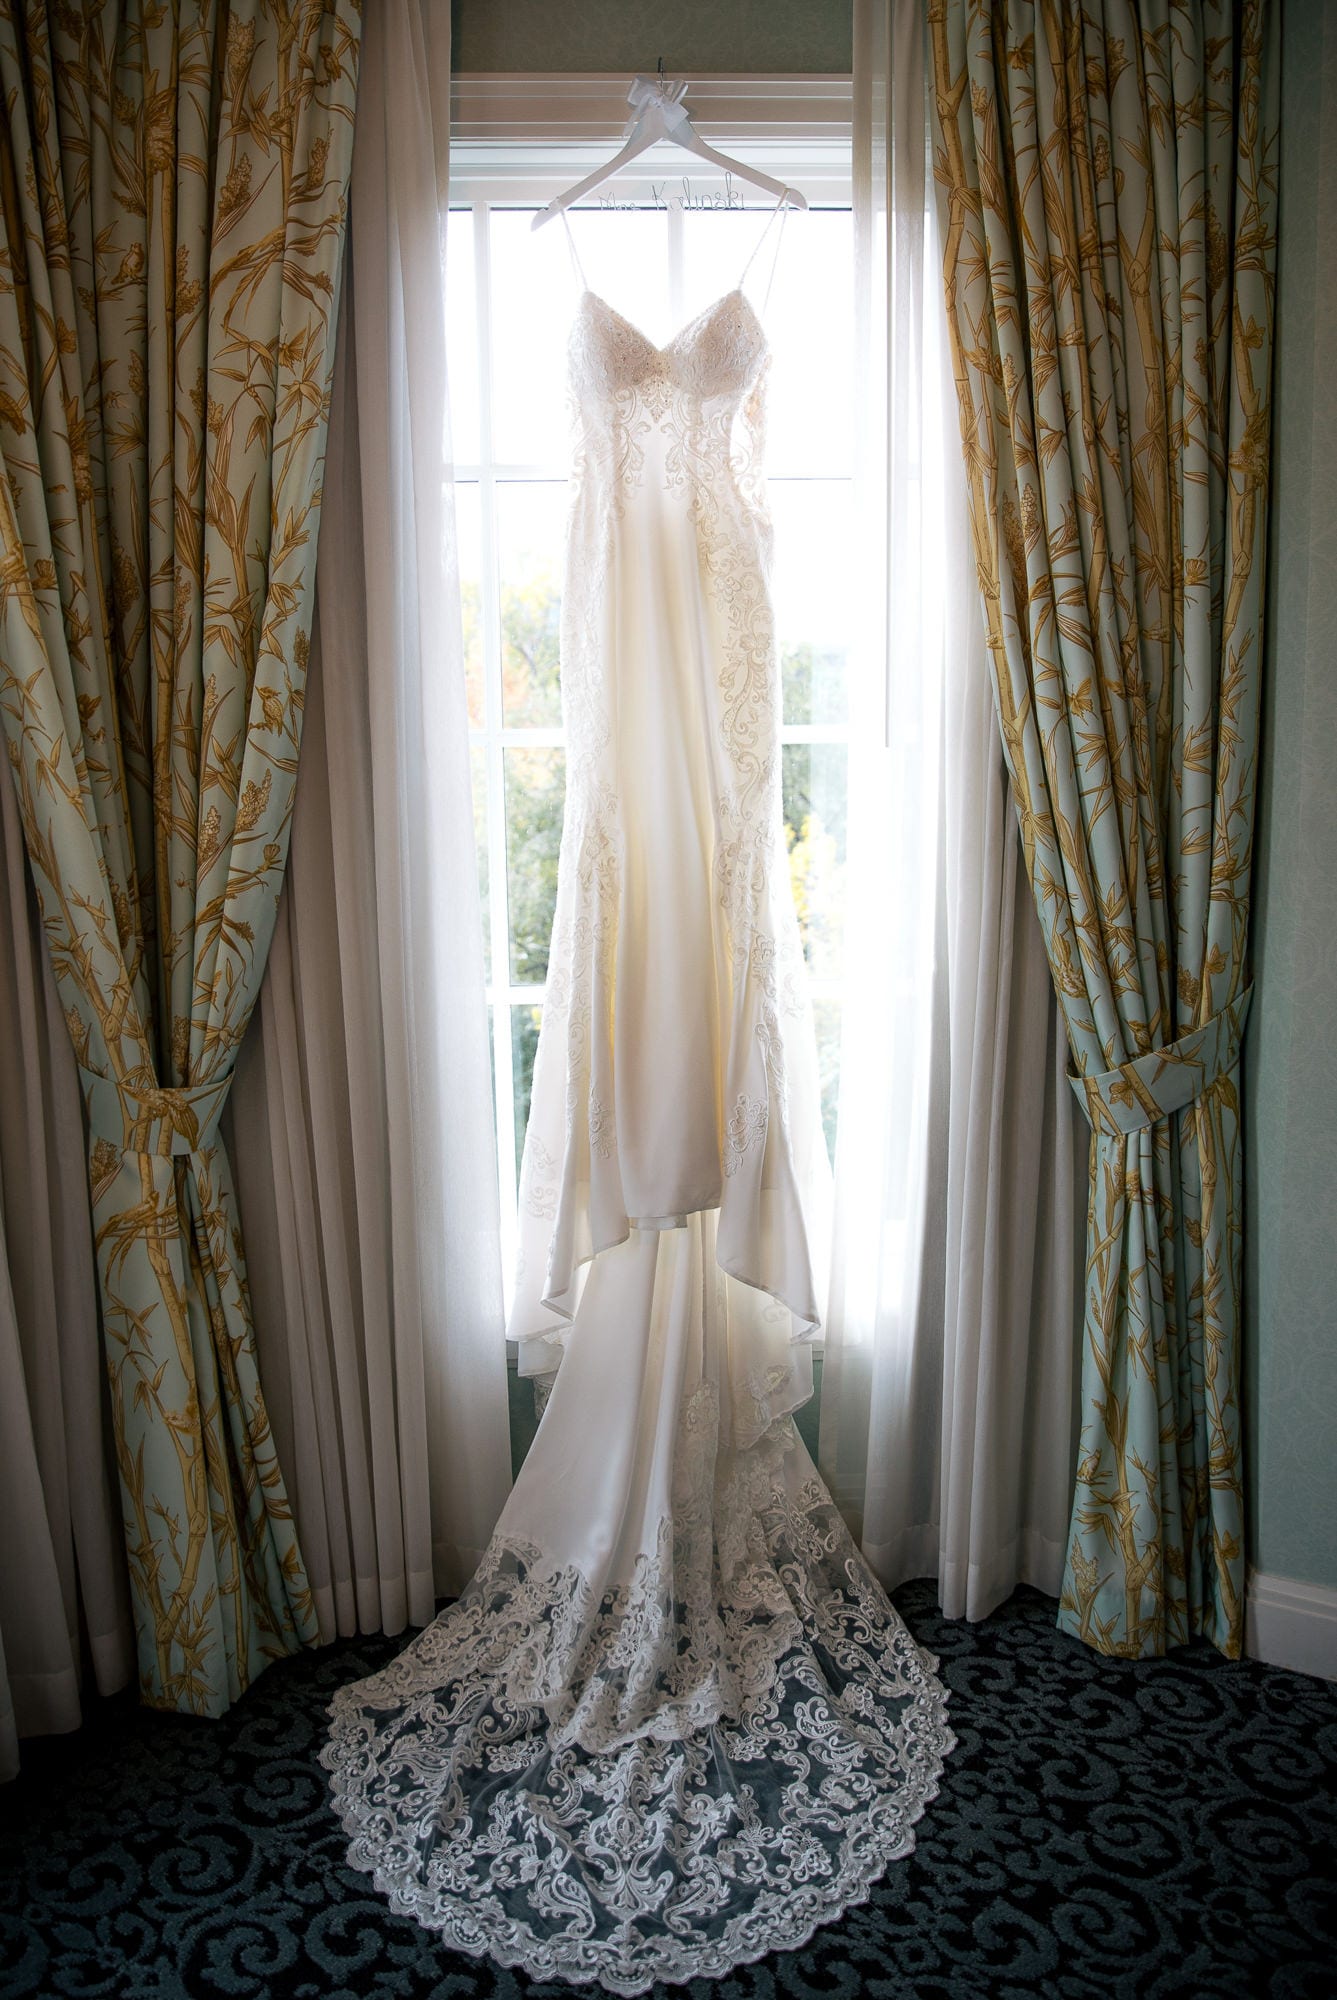 Wedding dress hanging up in front of window